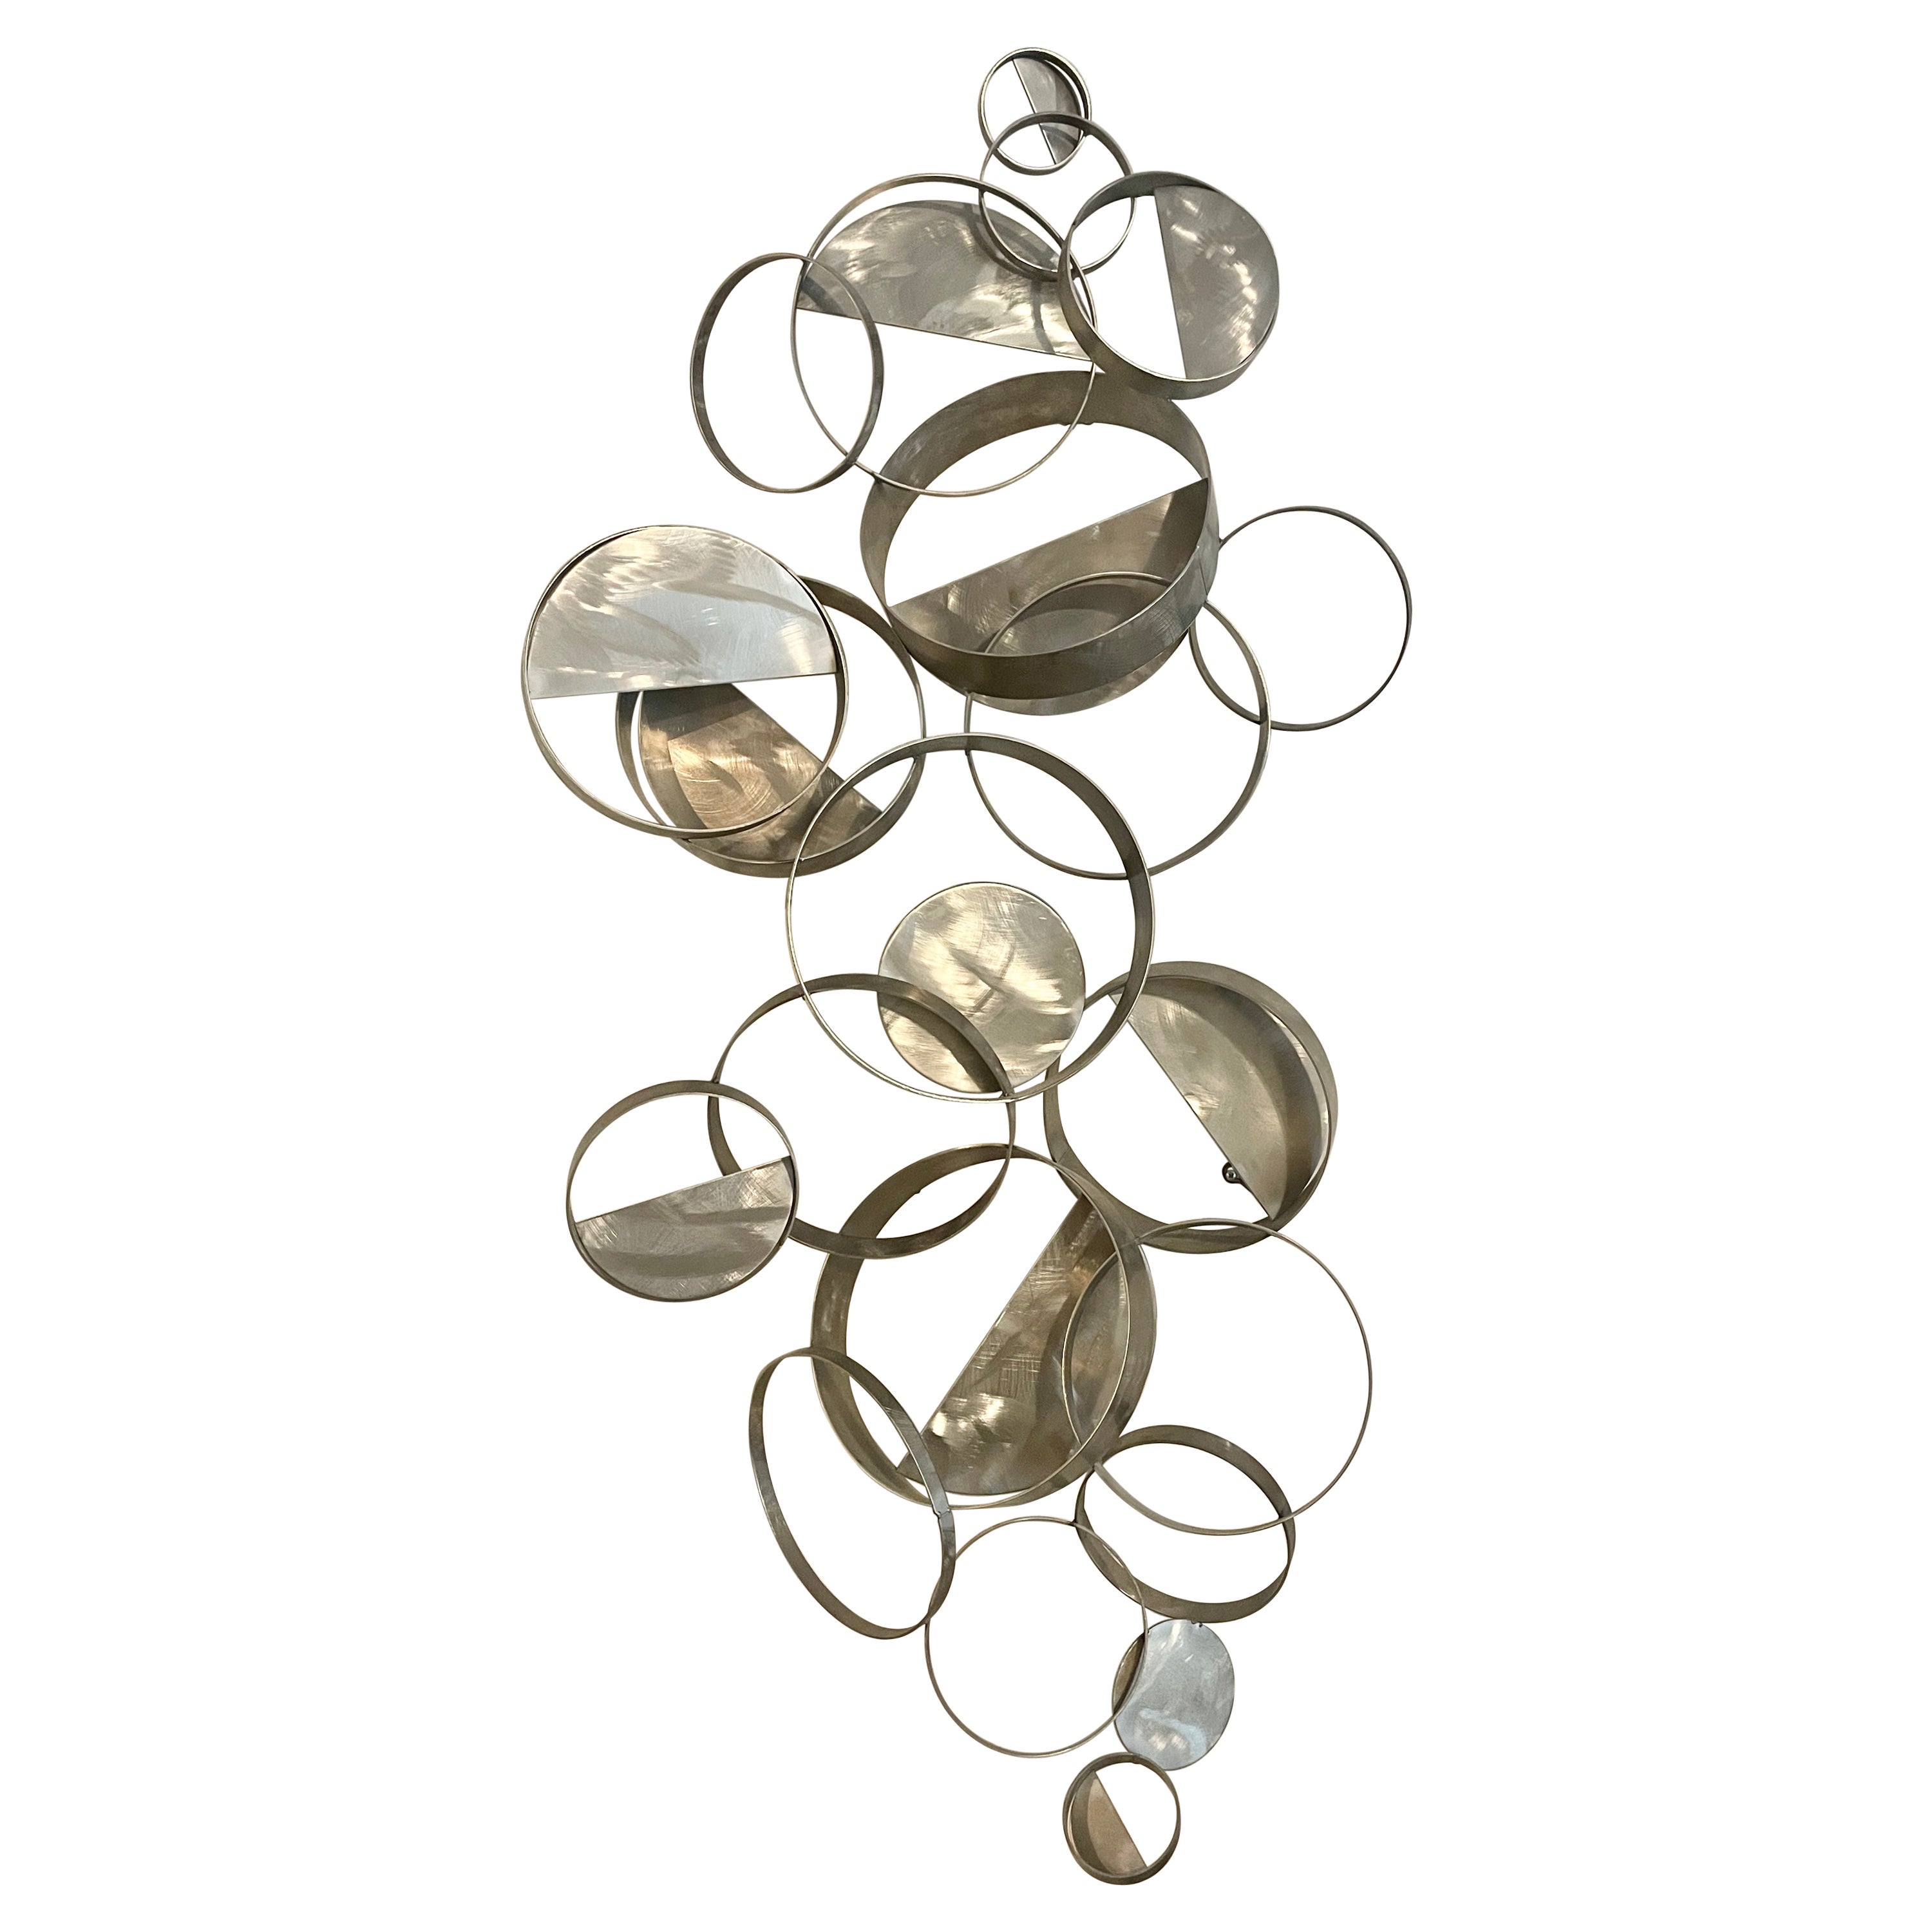 Curtis Jere "Floating Rings" Sculpture For Sale